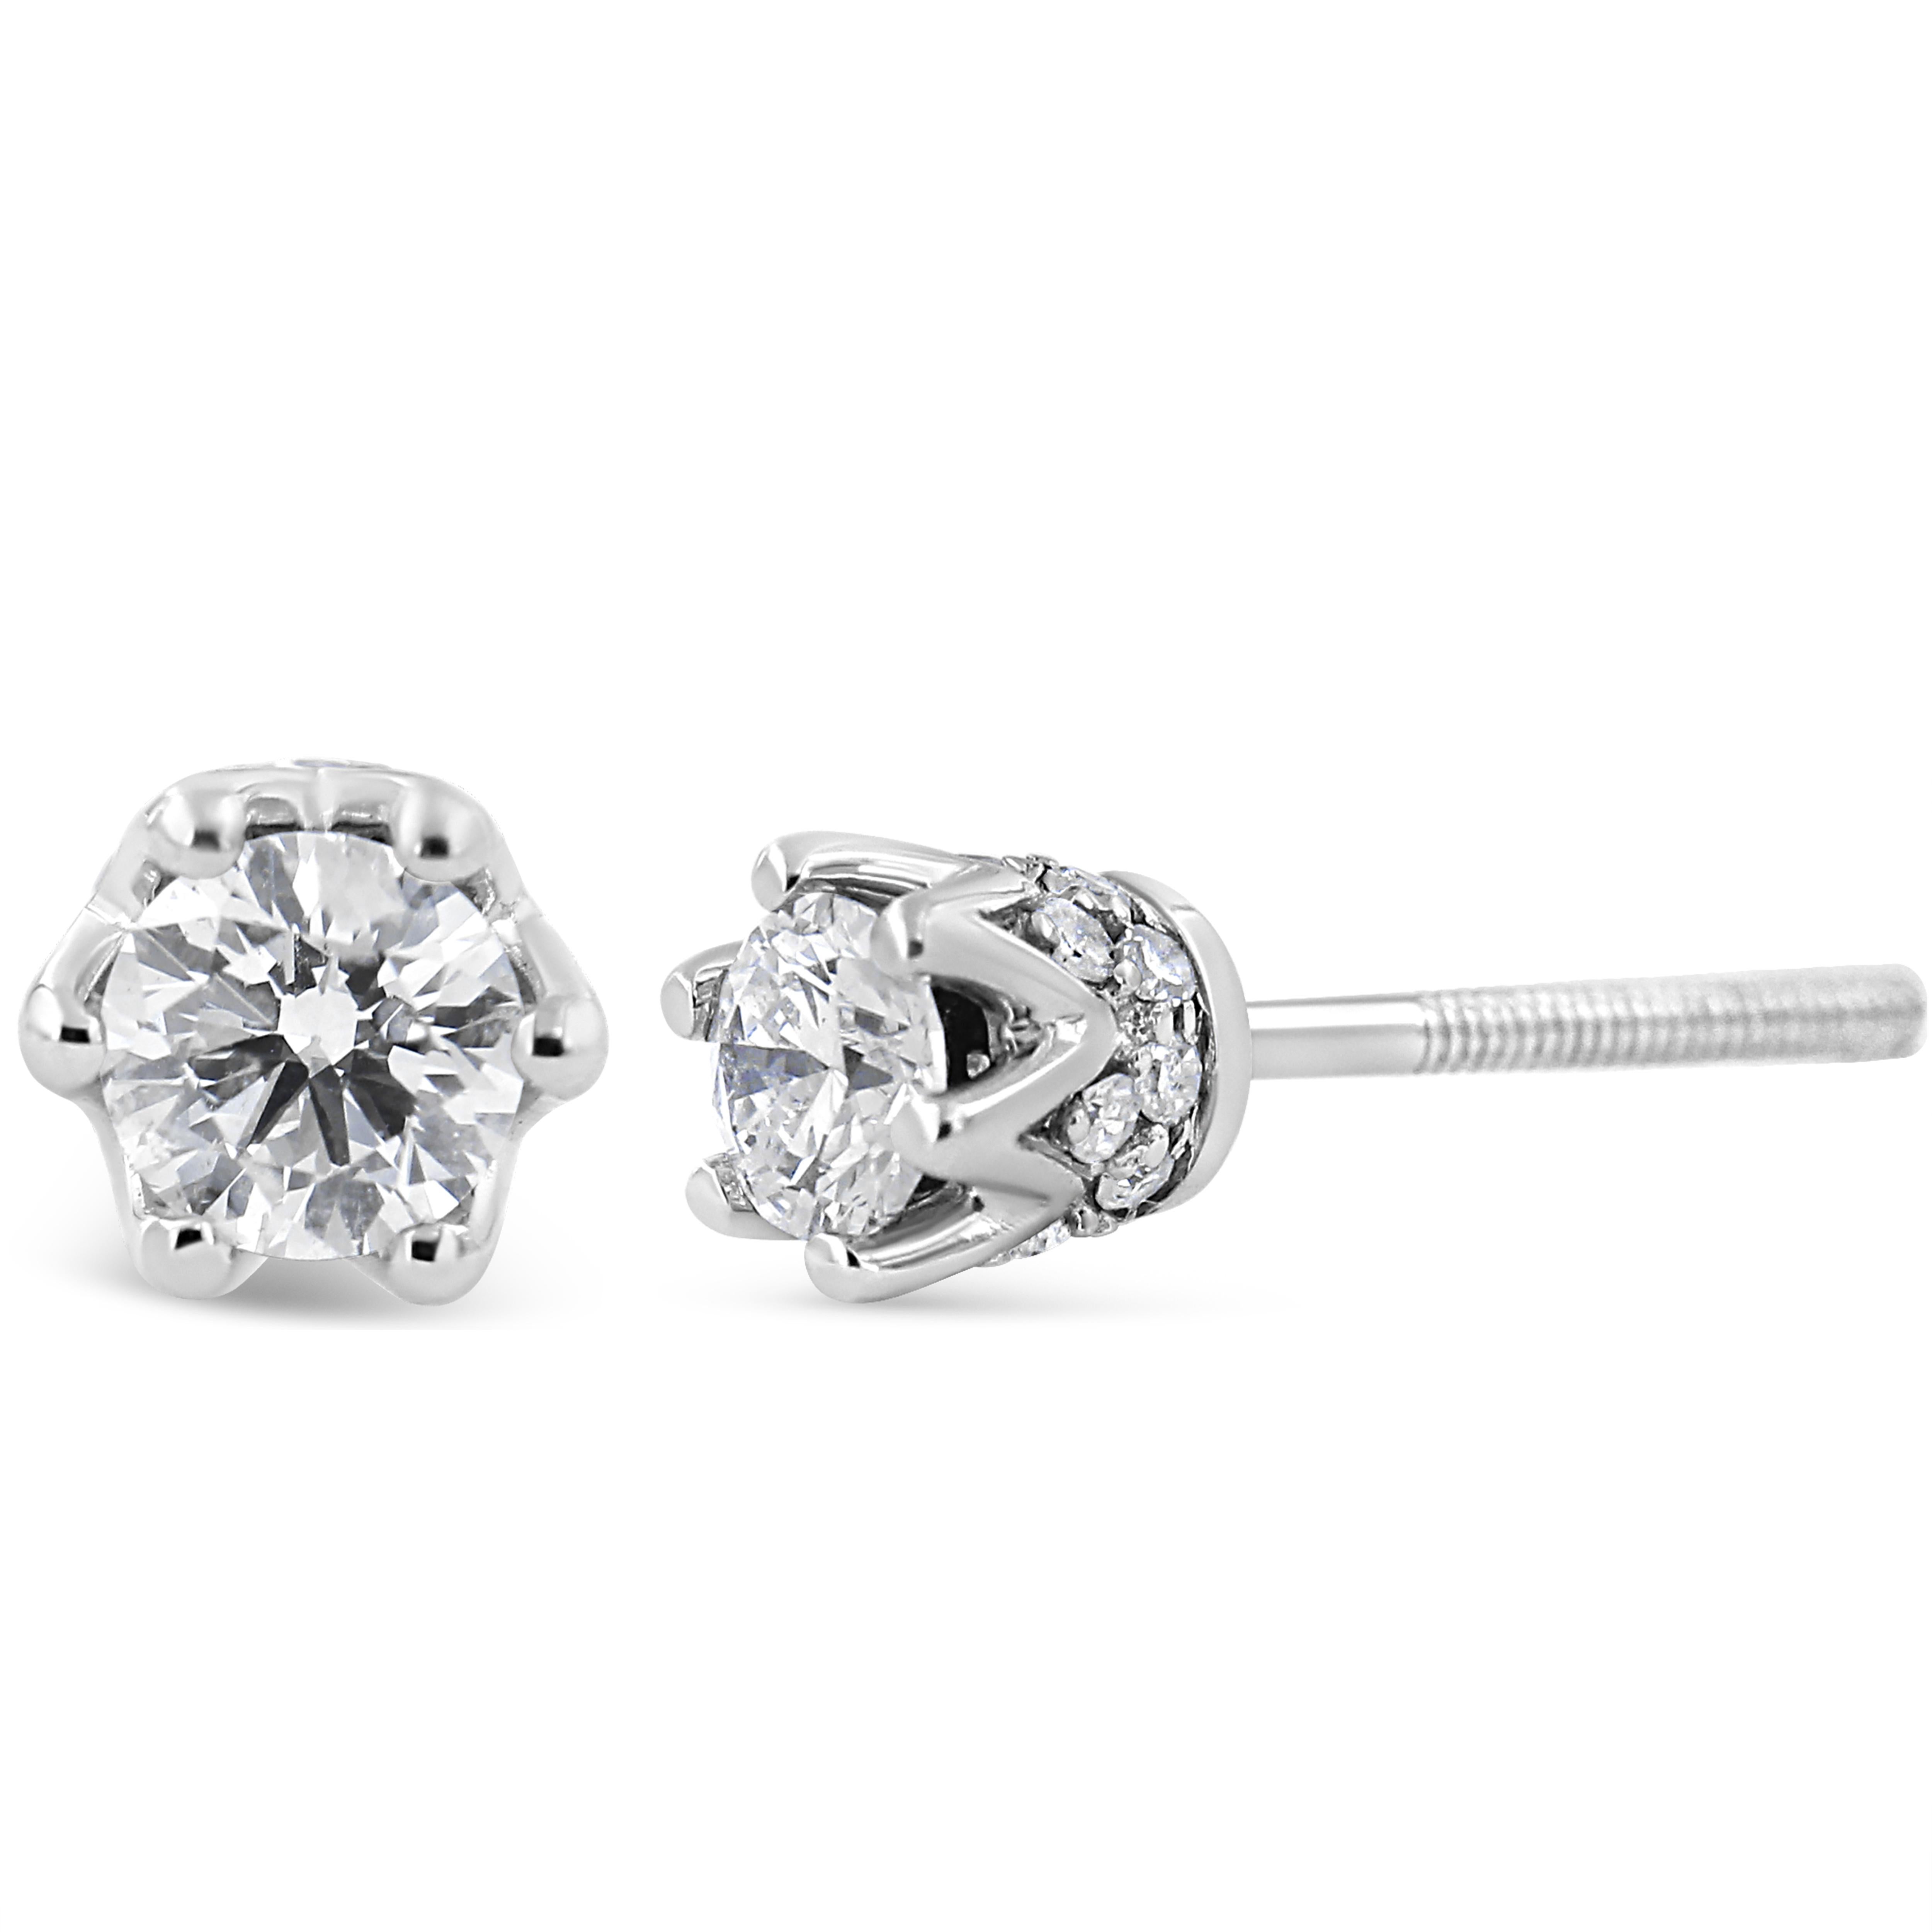 With regal hidden details, these diamond stud earrings are anything but ordinary. From the front, these 14kt white gold studs look like solitaires with a multi-prong setting. But the sideview brings into focus the crown design. Round diamond accents